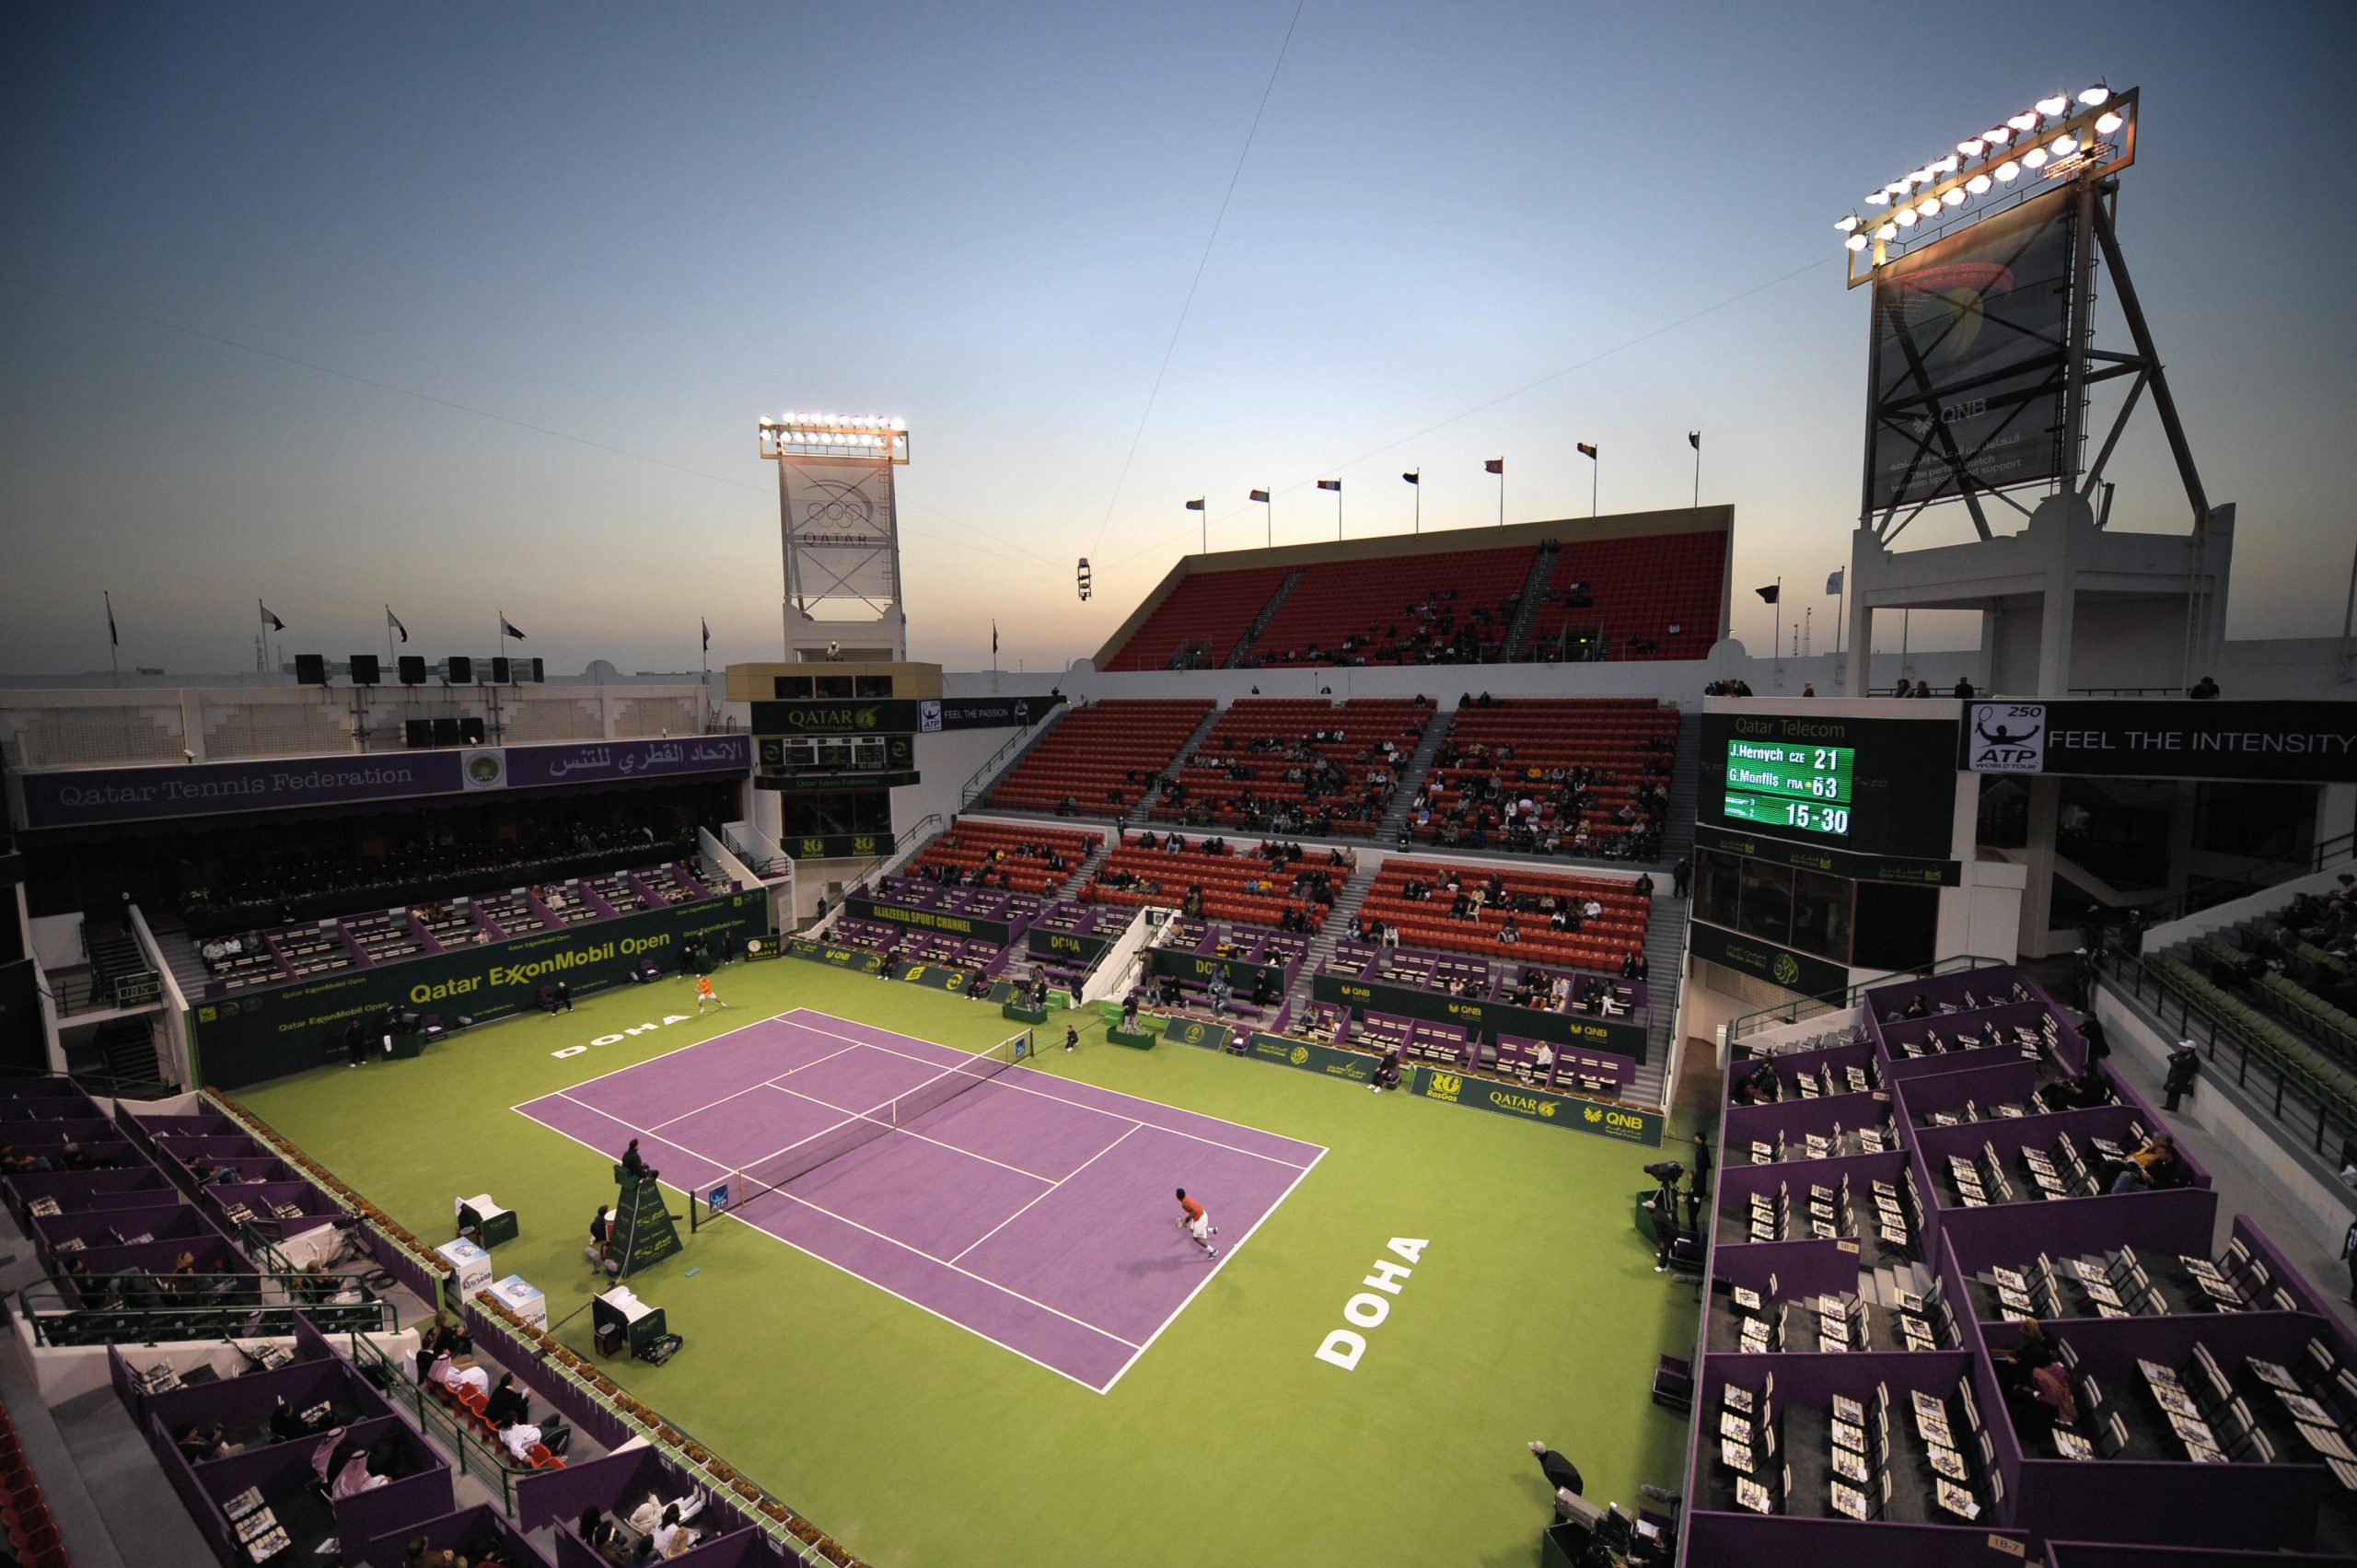 QTF Federer Participation in Qatar ExxonMobil Open What's